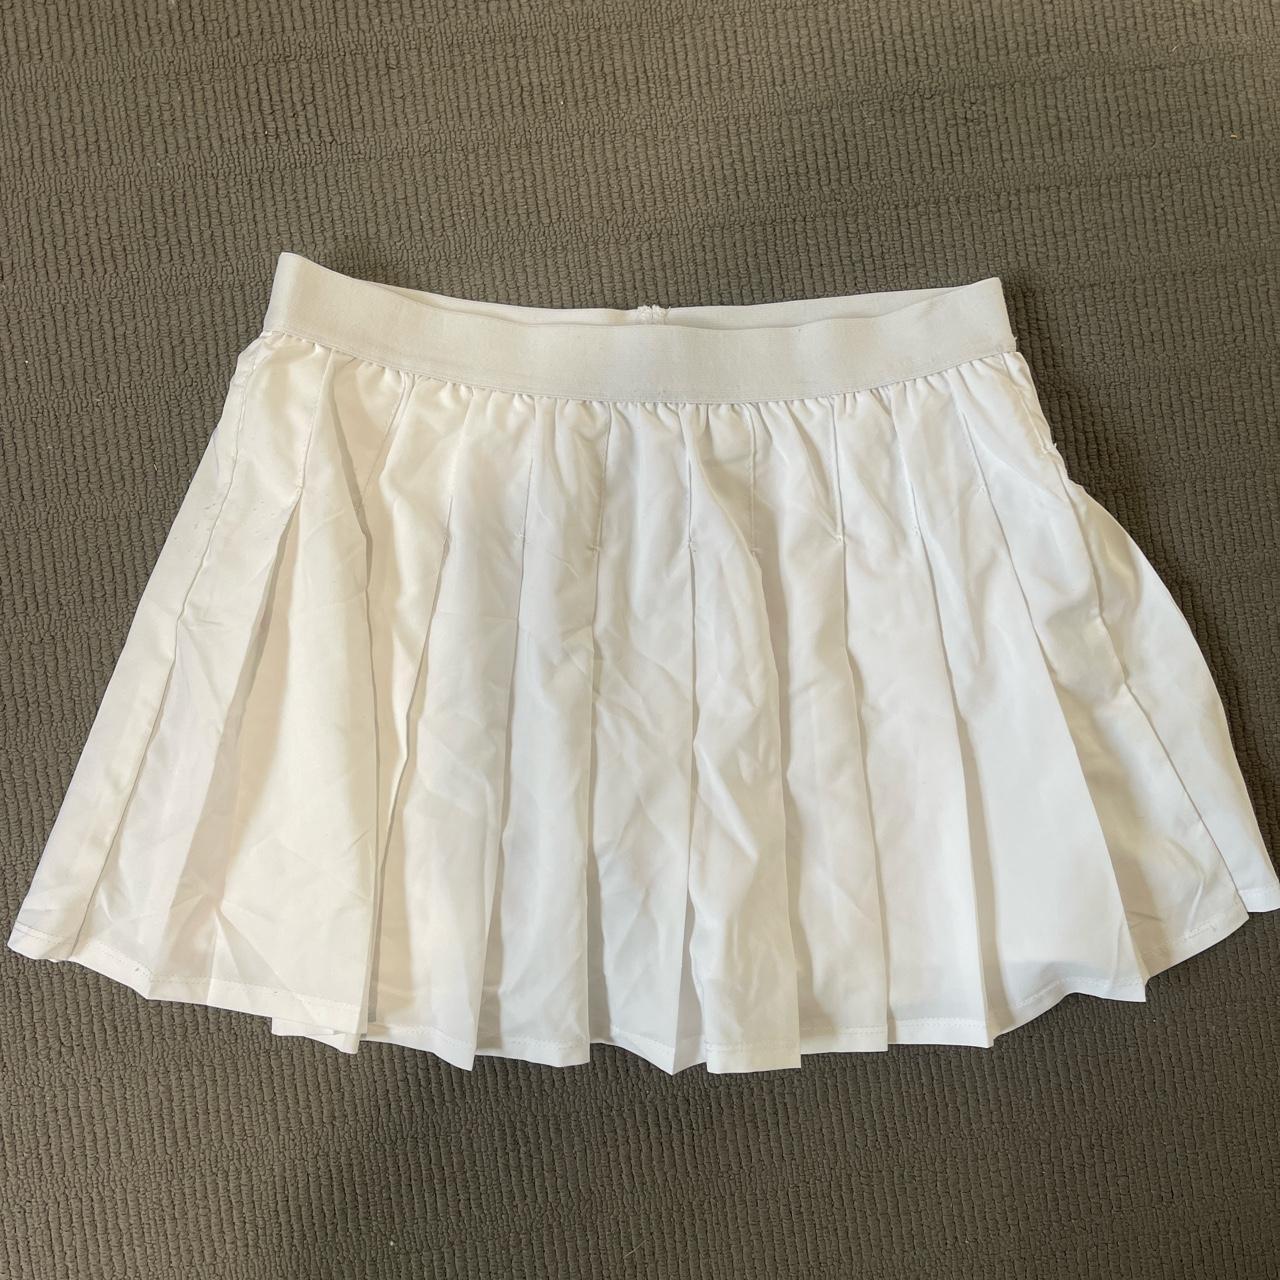 cotton on body white tennis skirt with... - Depop